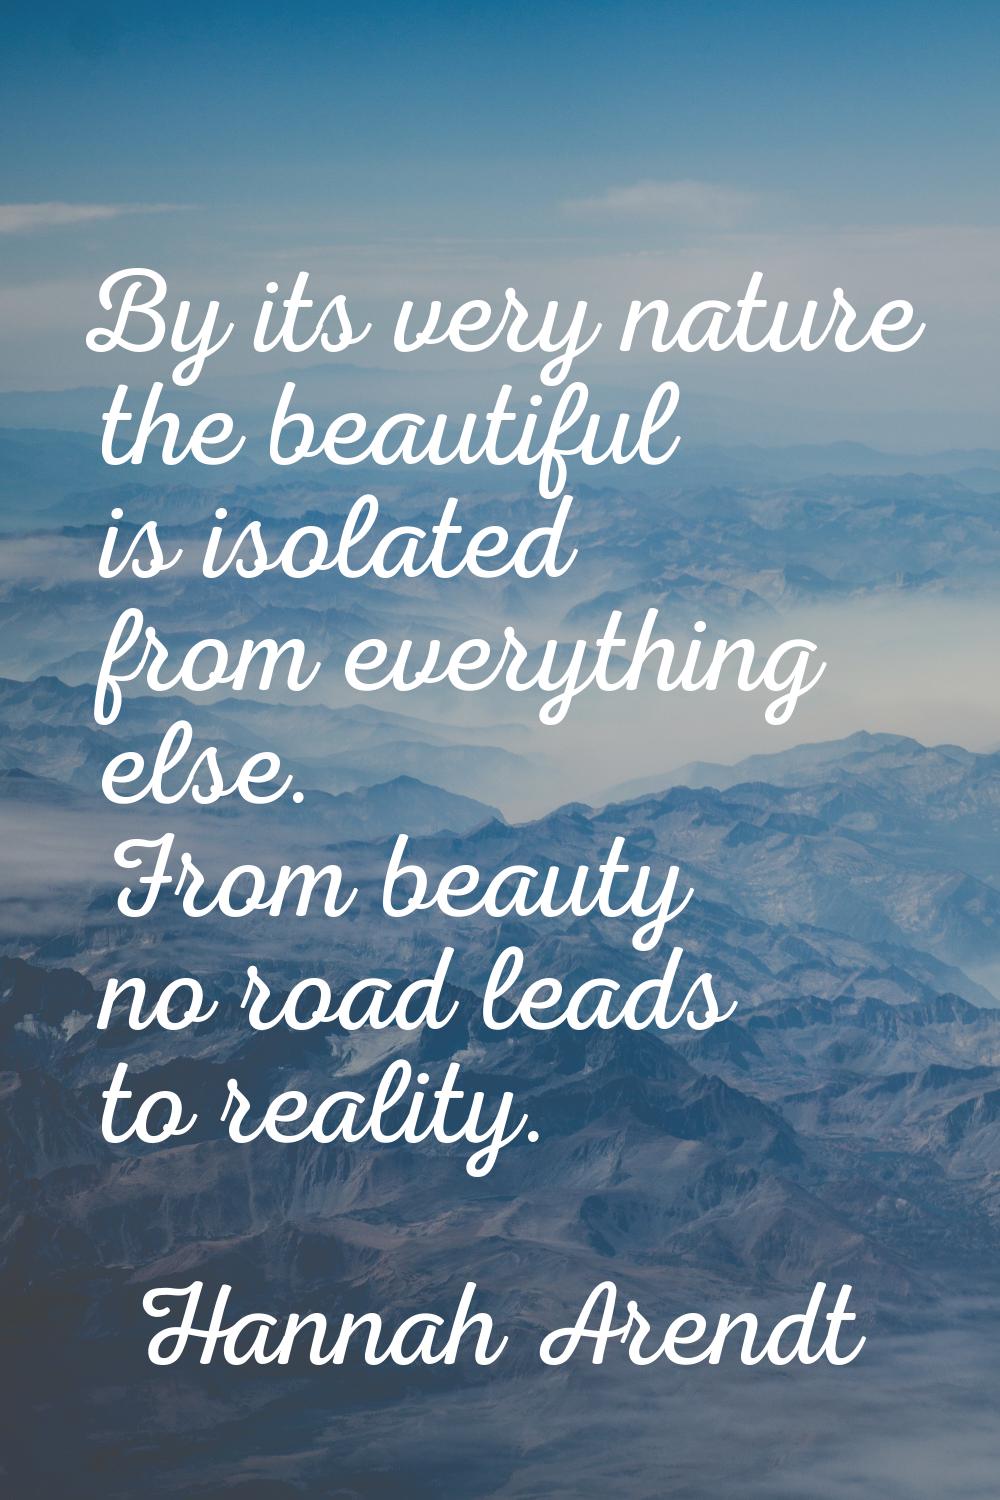 By its very nature the beautiful is isolated from everything else. From beauty no road leads to rea